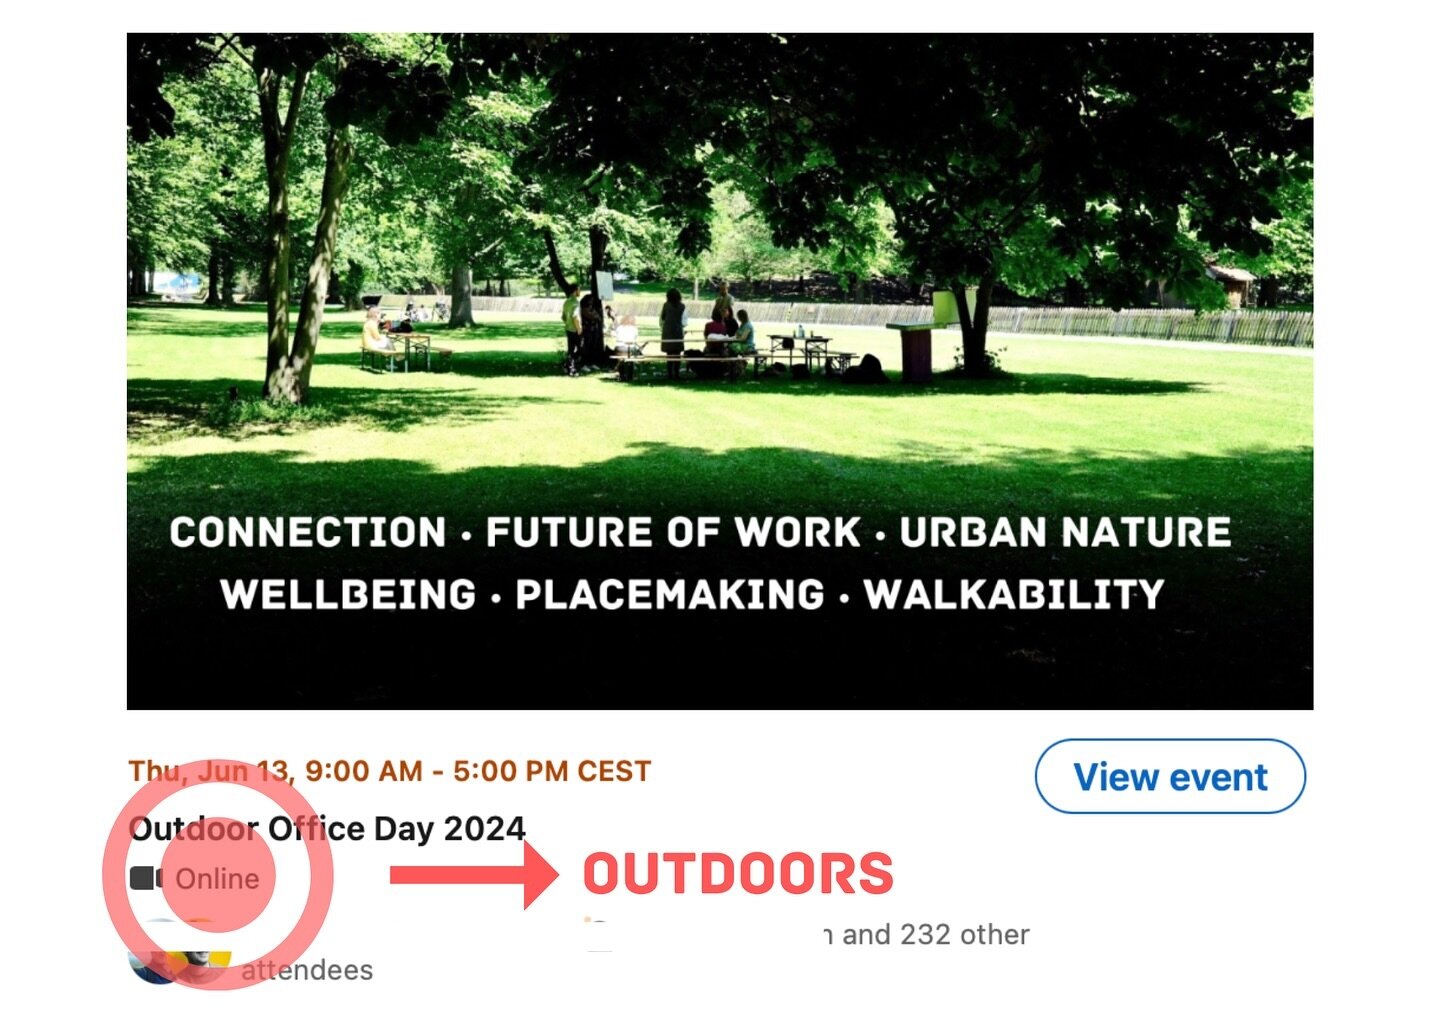 Do we know someone at @linkedin who can help?
#online &mdash;&gt;&gt; #outdoors 

💫 outdoorofficeday.info
🚀 link in bio

Untill then don&rsquo;t forget take work outdoors each day.

#outdoorofficeday 
#outdooroffice 
#walkingmeetings 
#outdoorworks